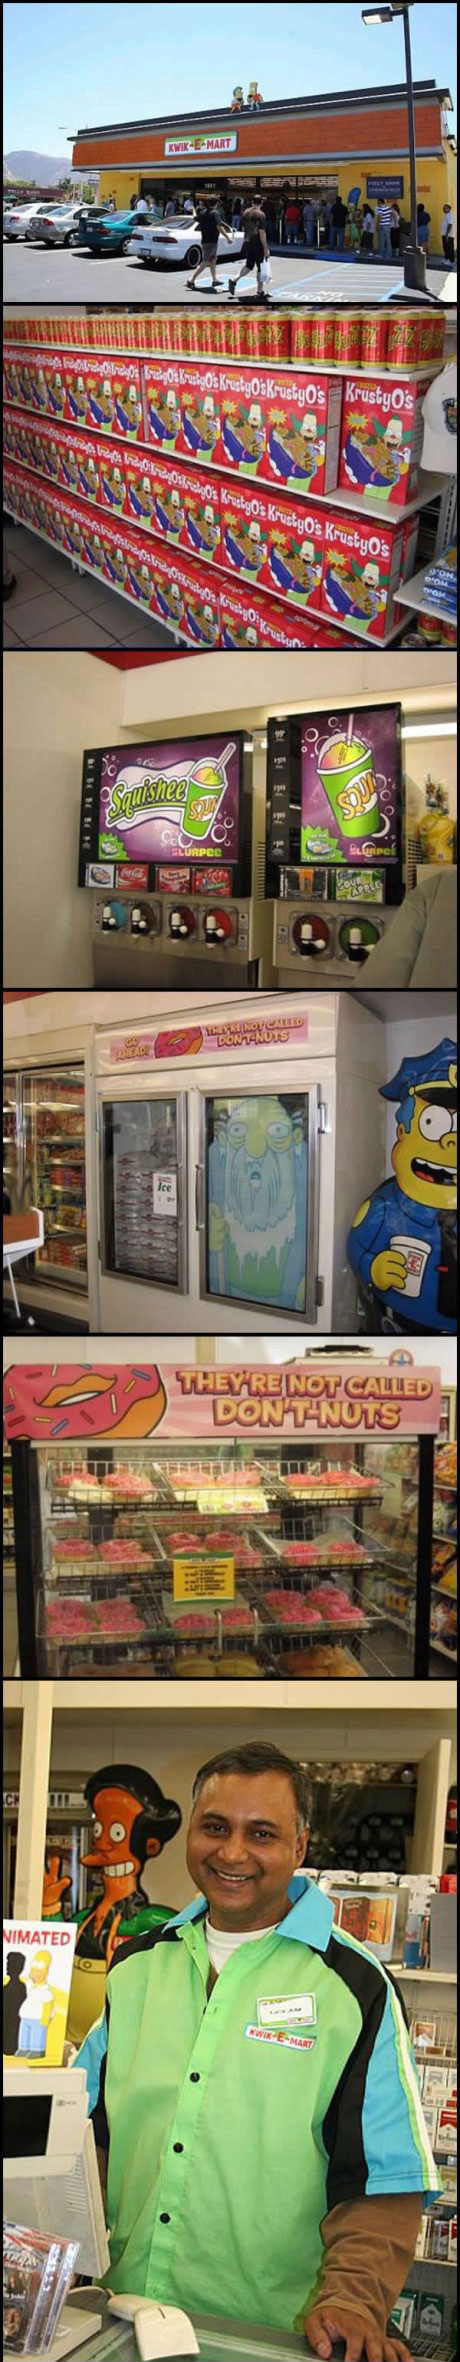 quick-e-mart, simpsons, squishee, krusty-o's